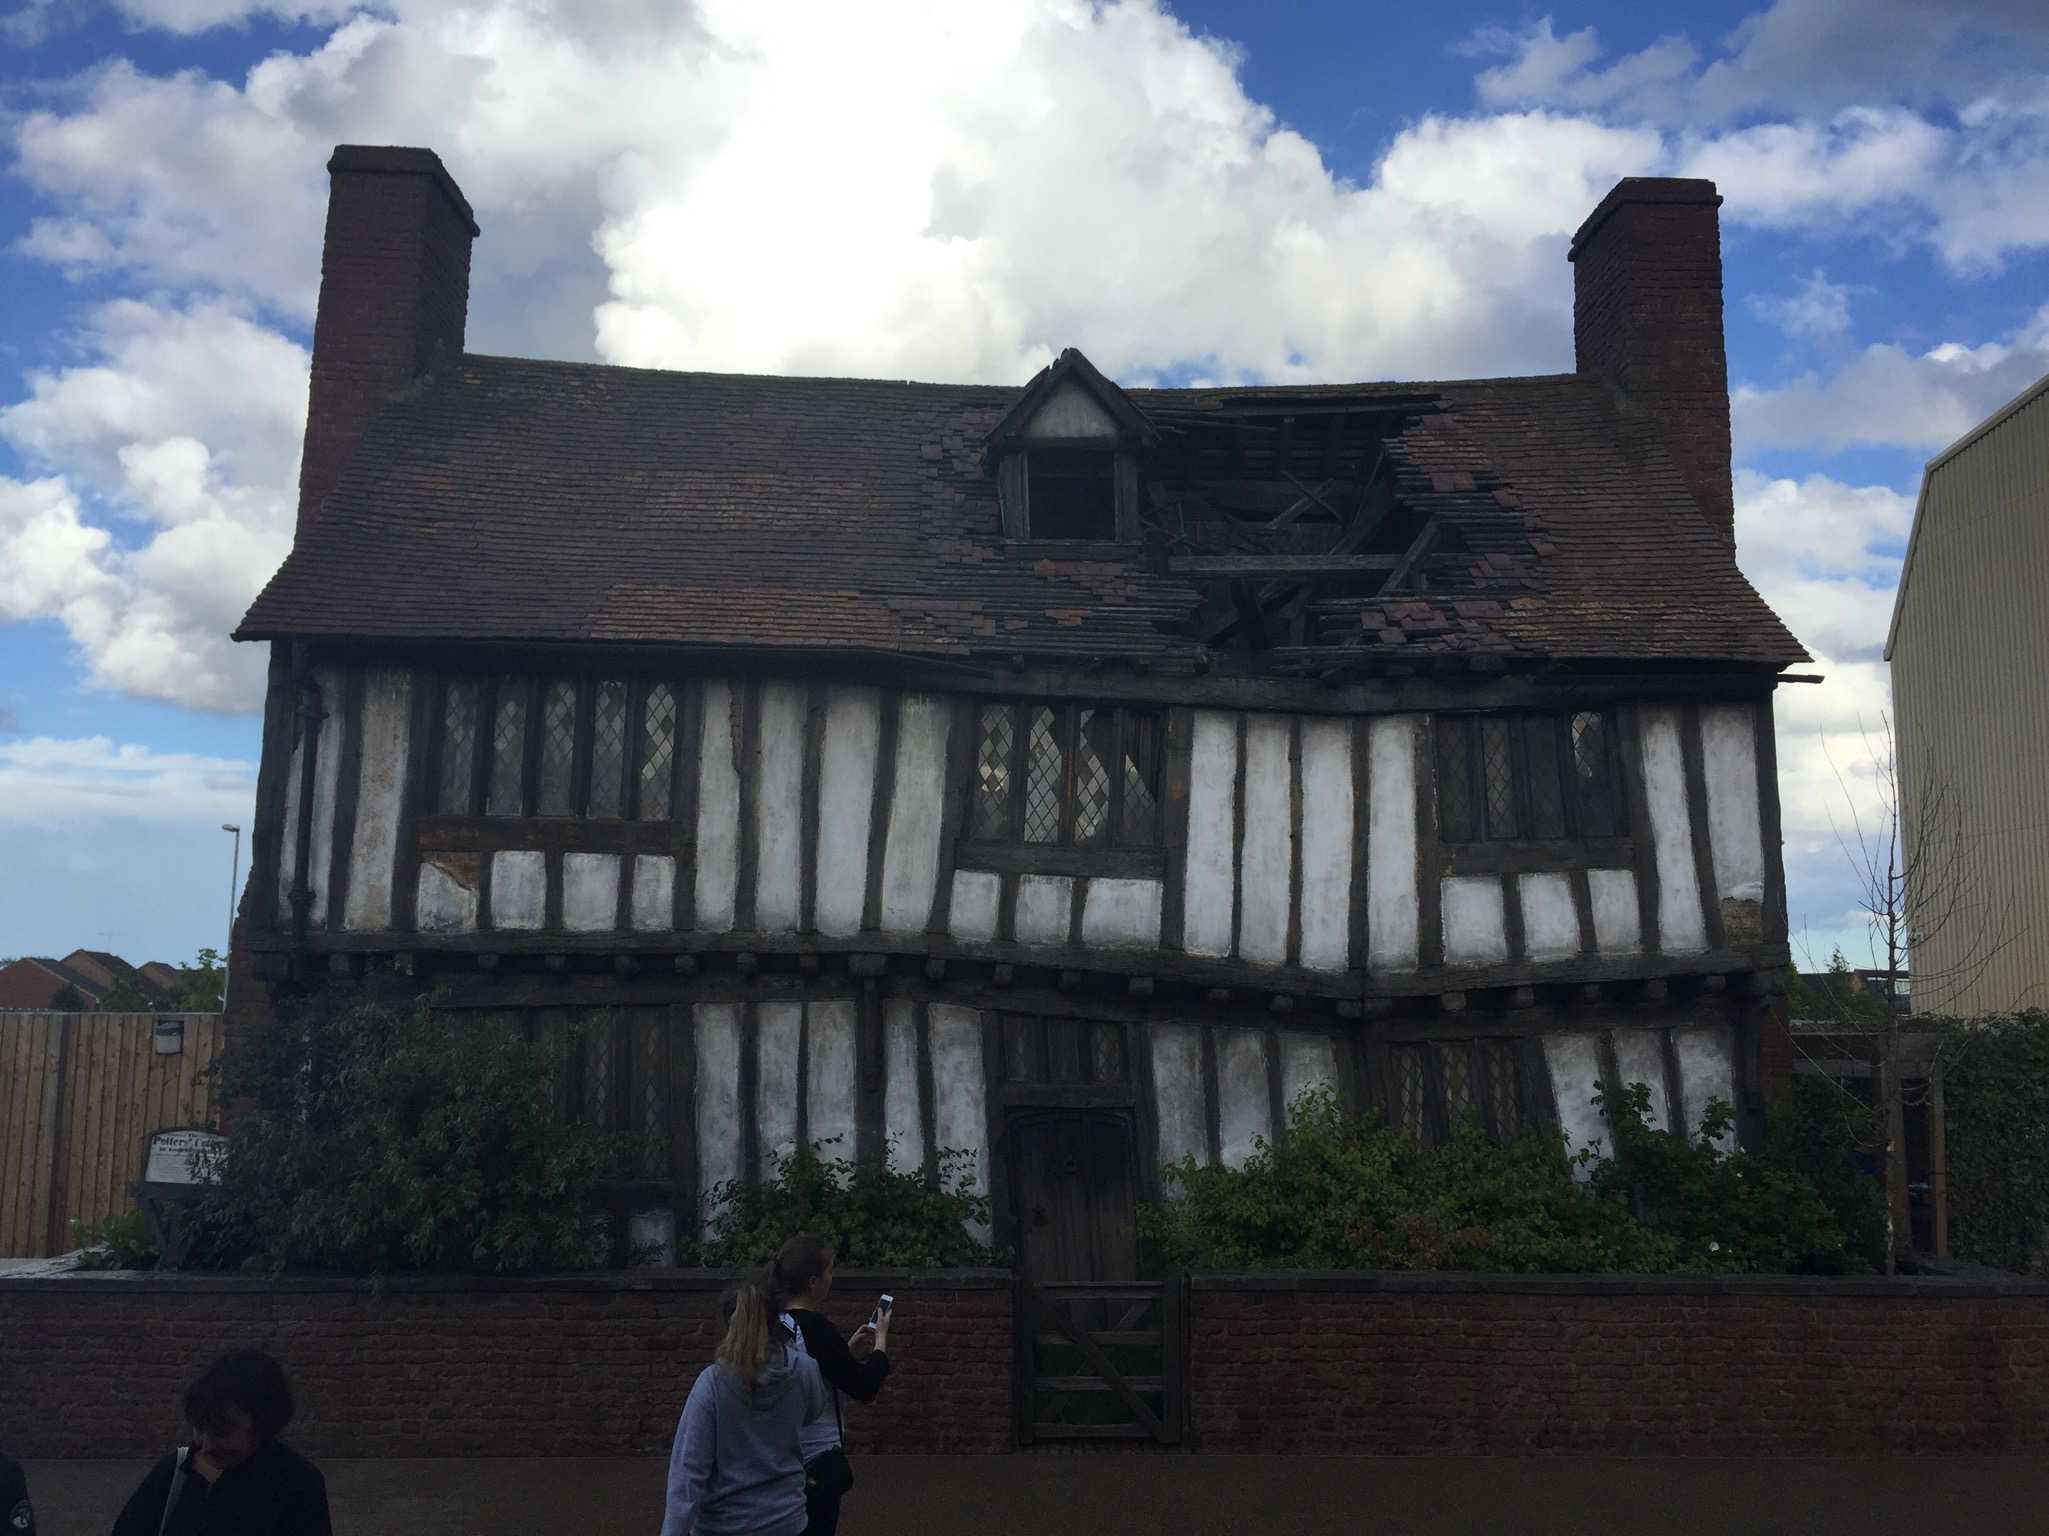 BABY POTTER: You can also visit Godric's Hollow, the birthplace of Harry Potter and where the first battle with Lord Voldemort took place. Spooky.